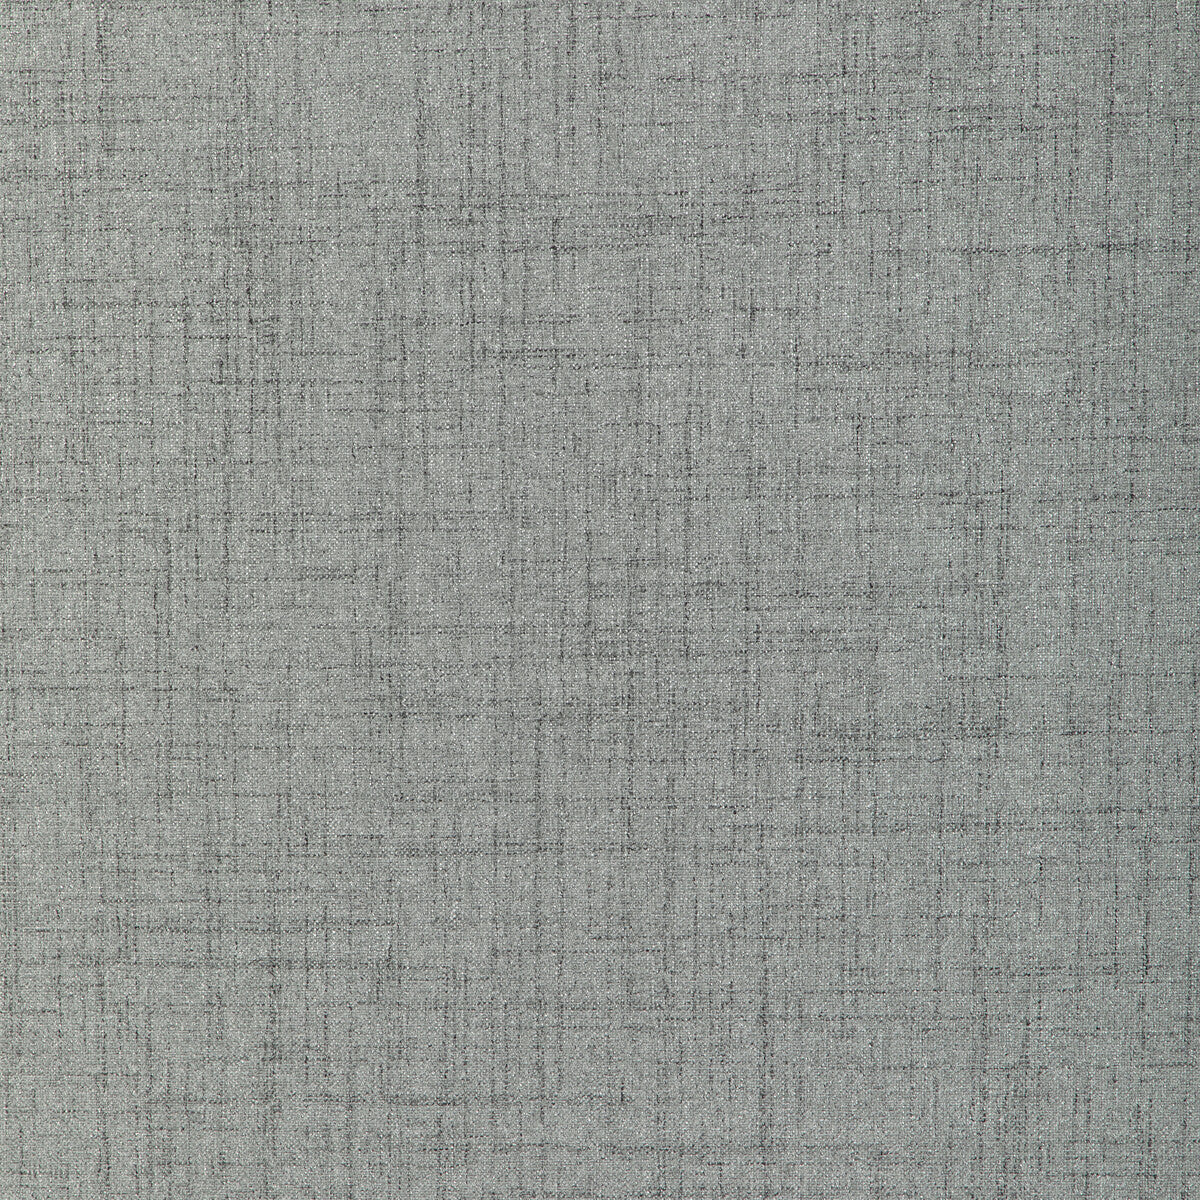 Kravet Contract fabric in 90016-2111 color - pattern 90016.2111.0 - by Kravet Contract in the Fr Window Blackout Drapery III collection